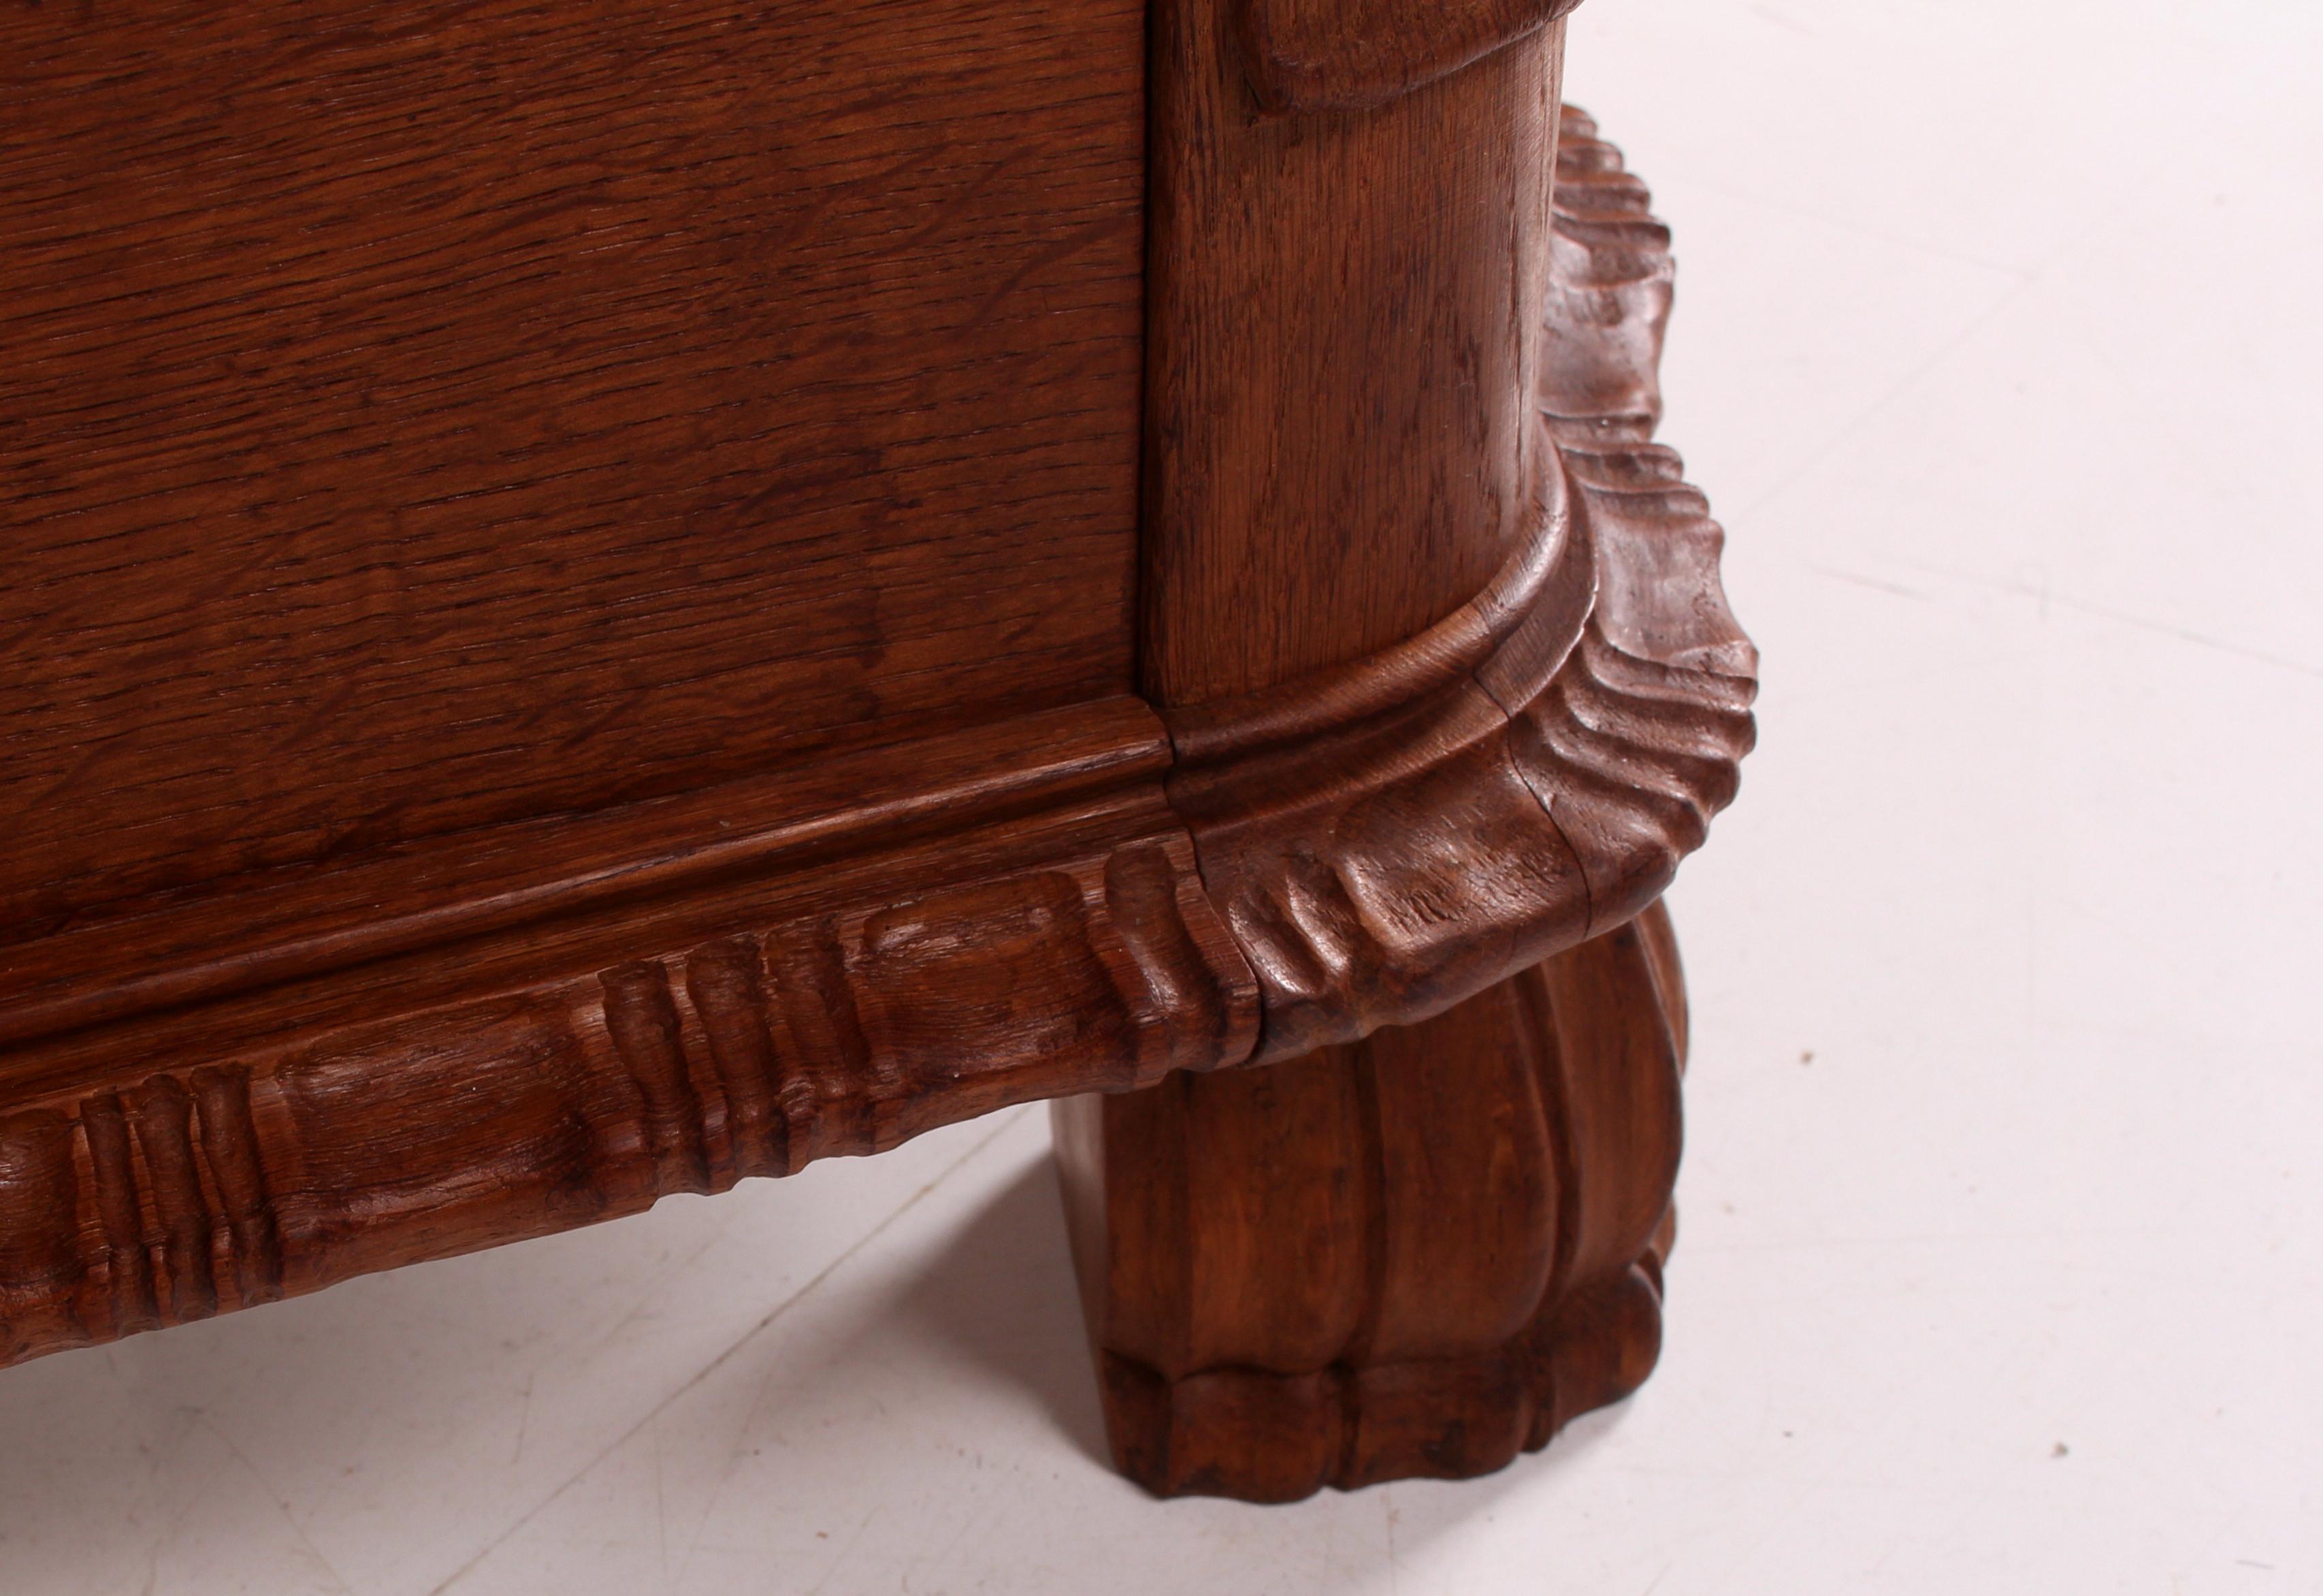 Colli Torino  'Est. 1850 ' Italian Art Nouveau Bed & Nightstand Solid Oak carved For Sale 4